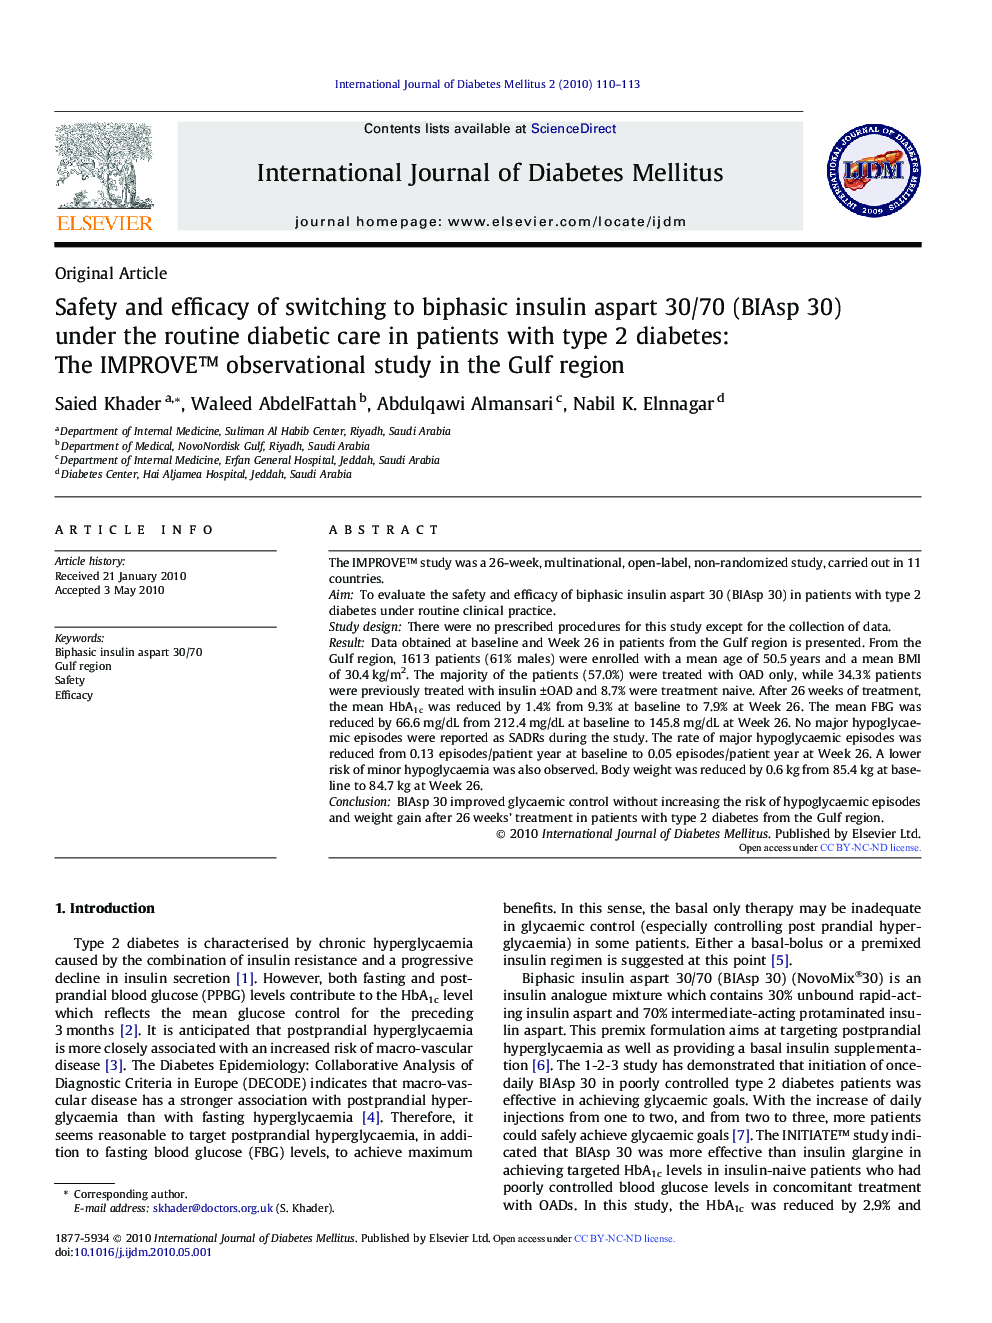 Safety and efficacy of switching to biphasic insulin aspart 30/70 (BIAsp 30) under the routine diabetic care in patients with type 2 diabetes: The IMPROVE™ observational study in the Gulf region